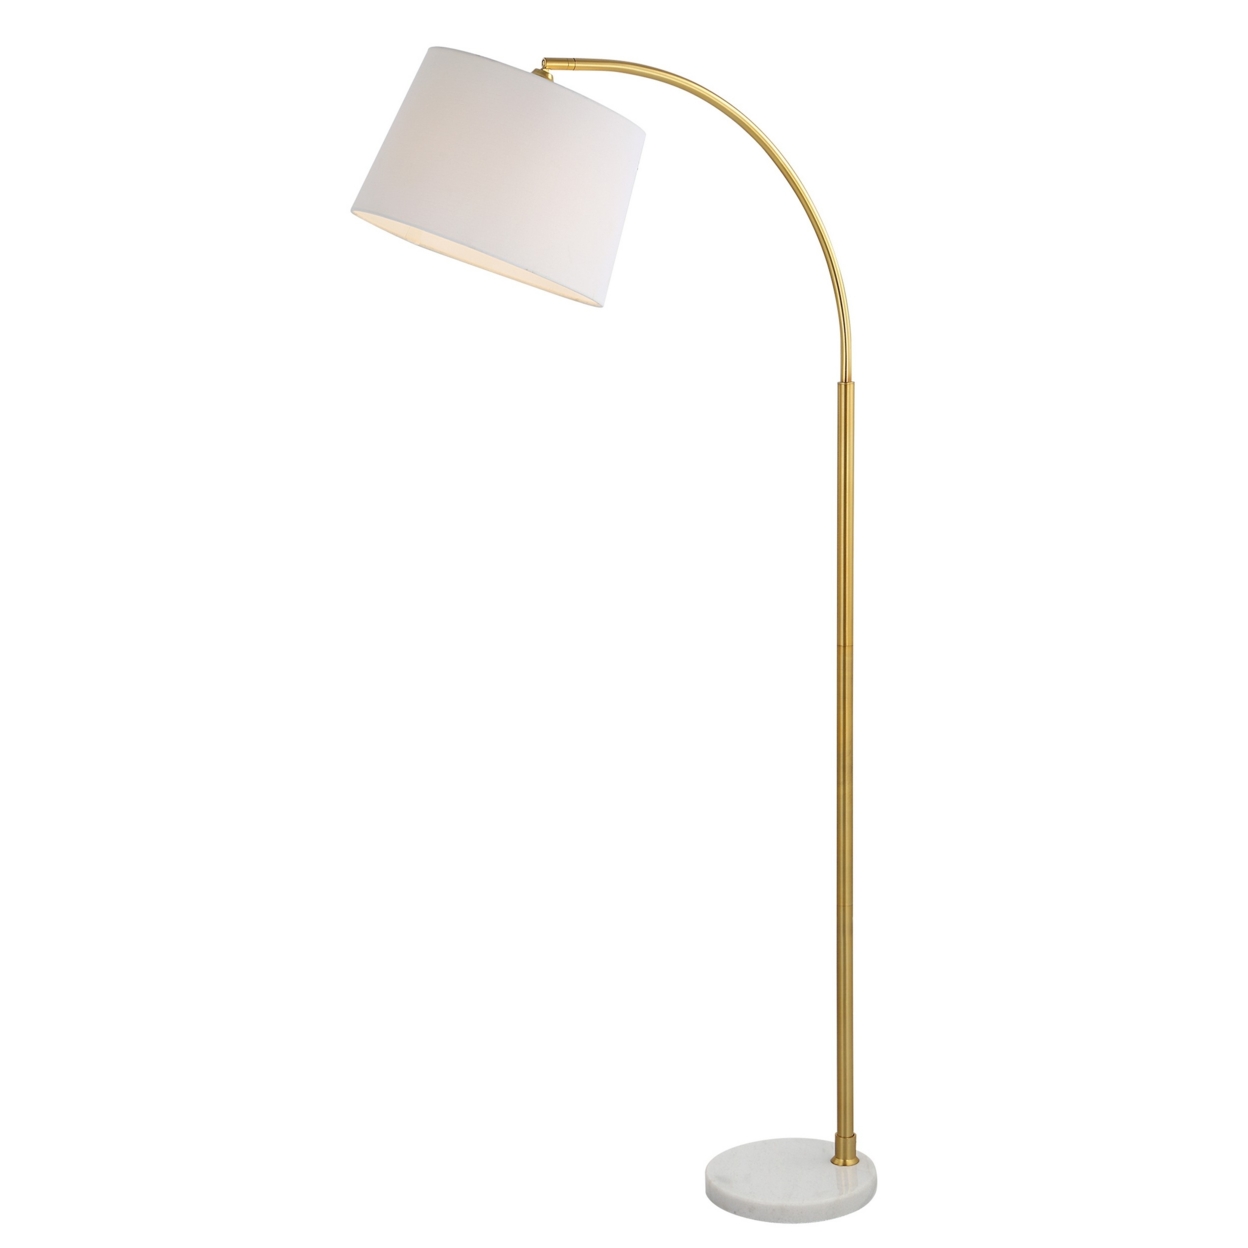 65 Inch Arc Floor Lamp With Adjustable Shade, Marble Base, Gold, White- Saltoro Sherpi